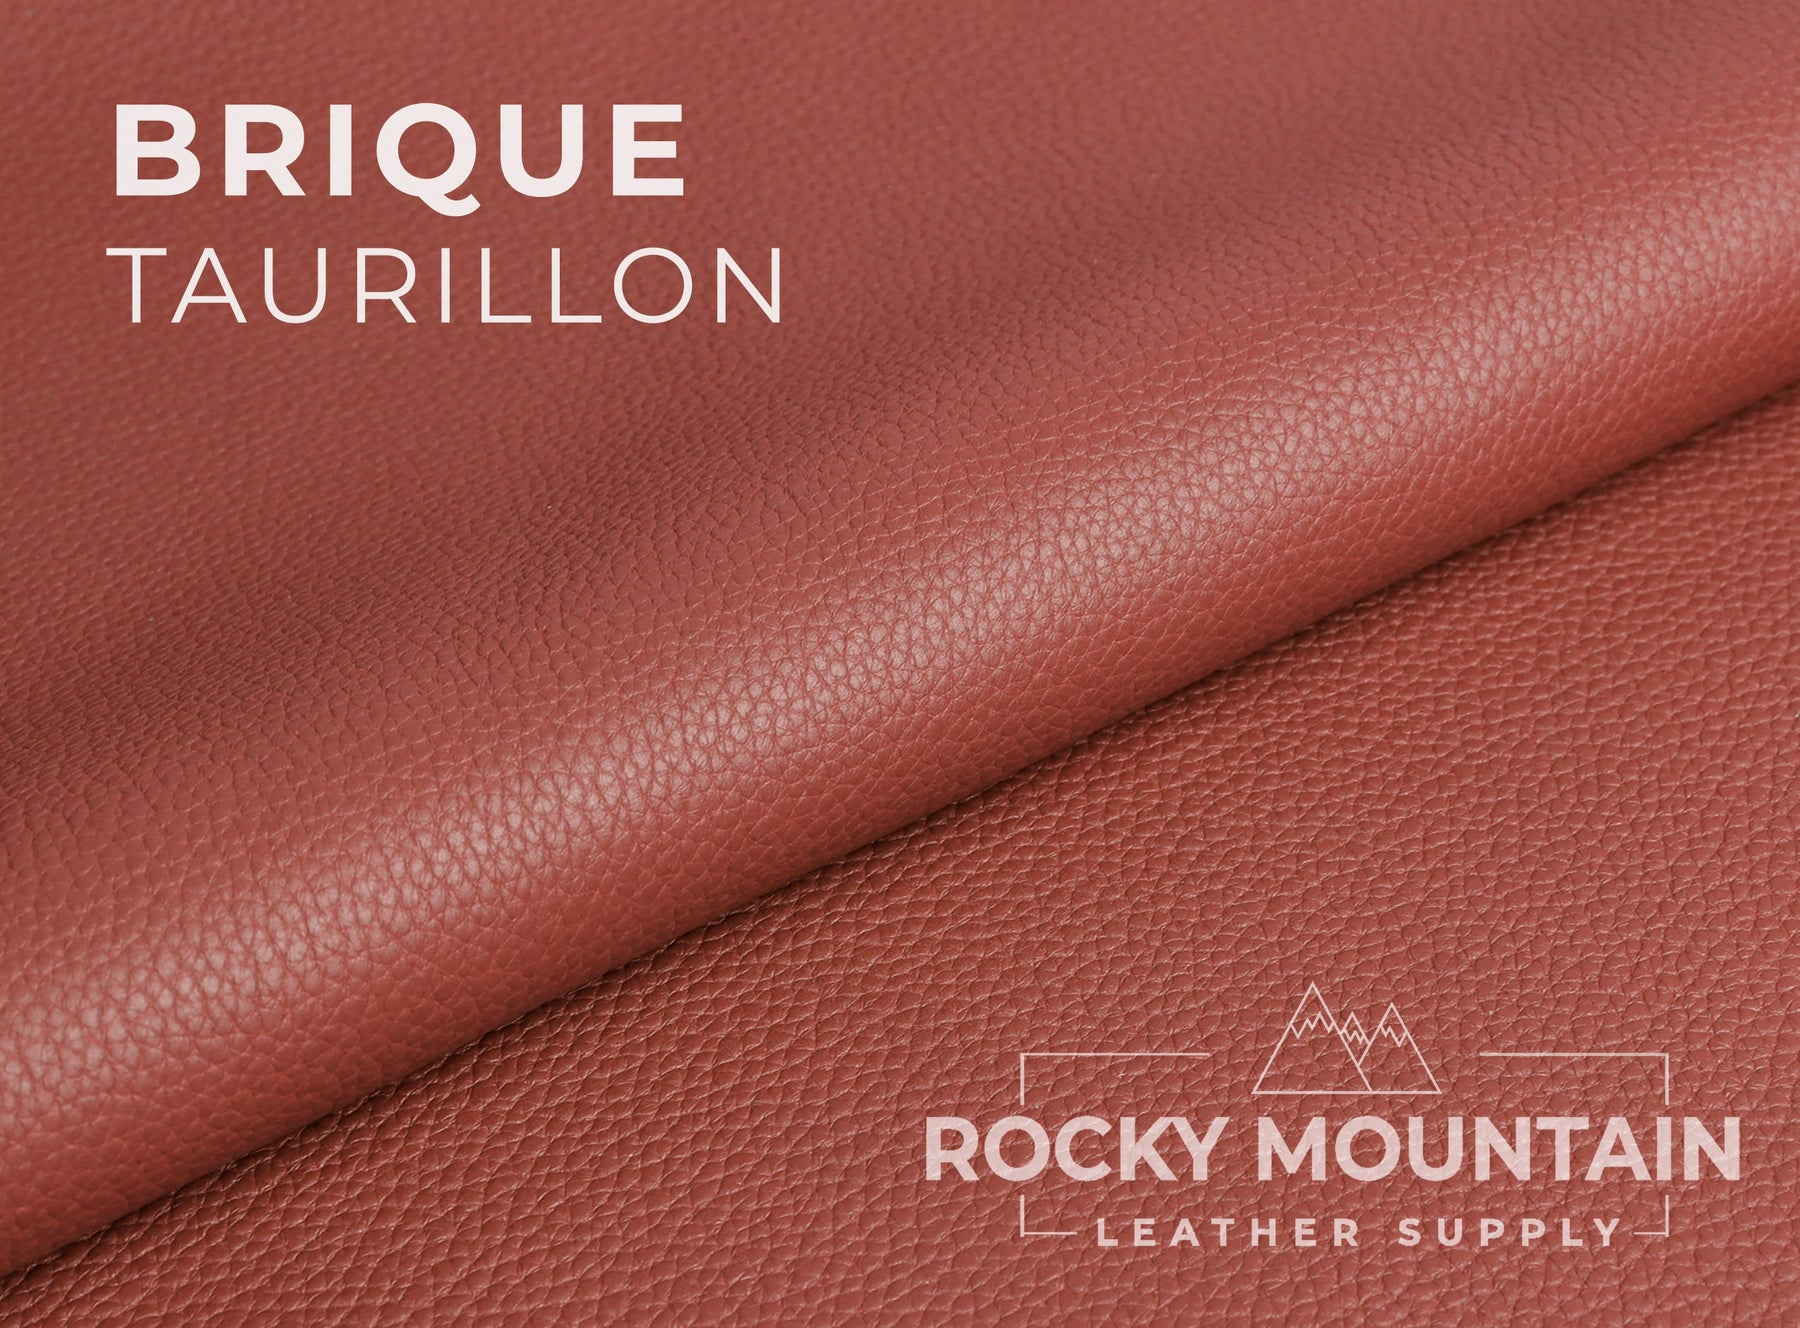 Taurillon - Luxury Handbag Large Pebbled Young Bull Leather (HIDES) Sanguine - Full Hide - Large (20-22 Sqft) by Rocky Mountain Leather Supply